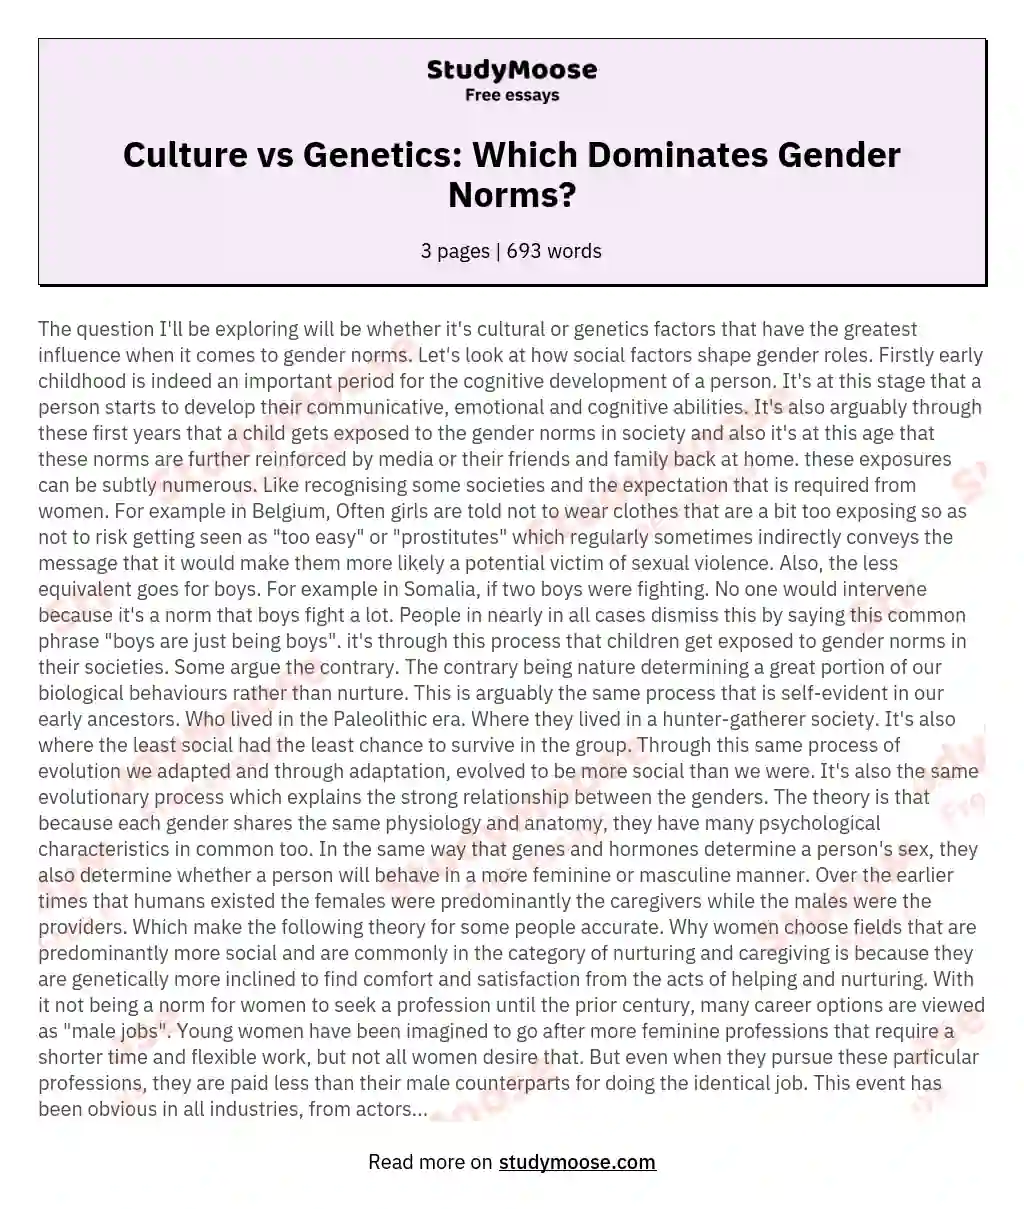 Will be Whether it's Cultural or Genetics Factors That Have the Greatest Influence When It Comes to Gender Norms.